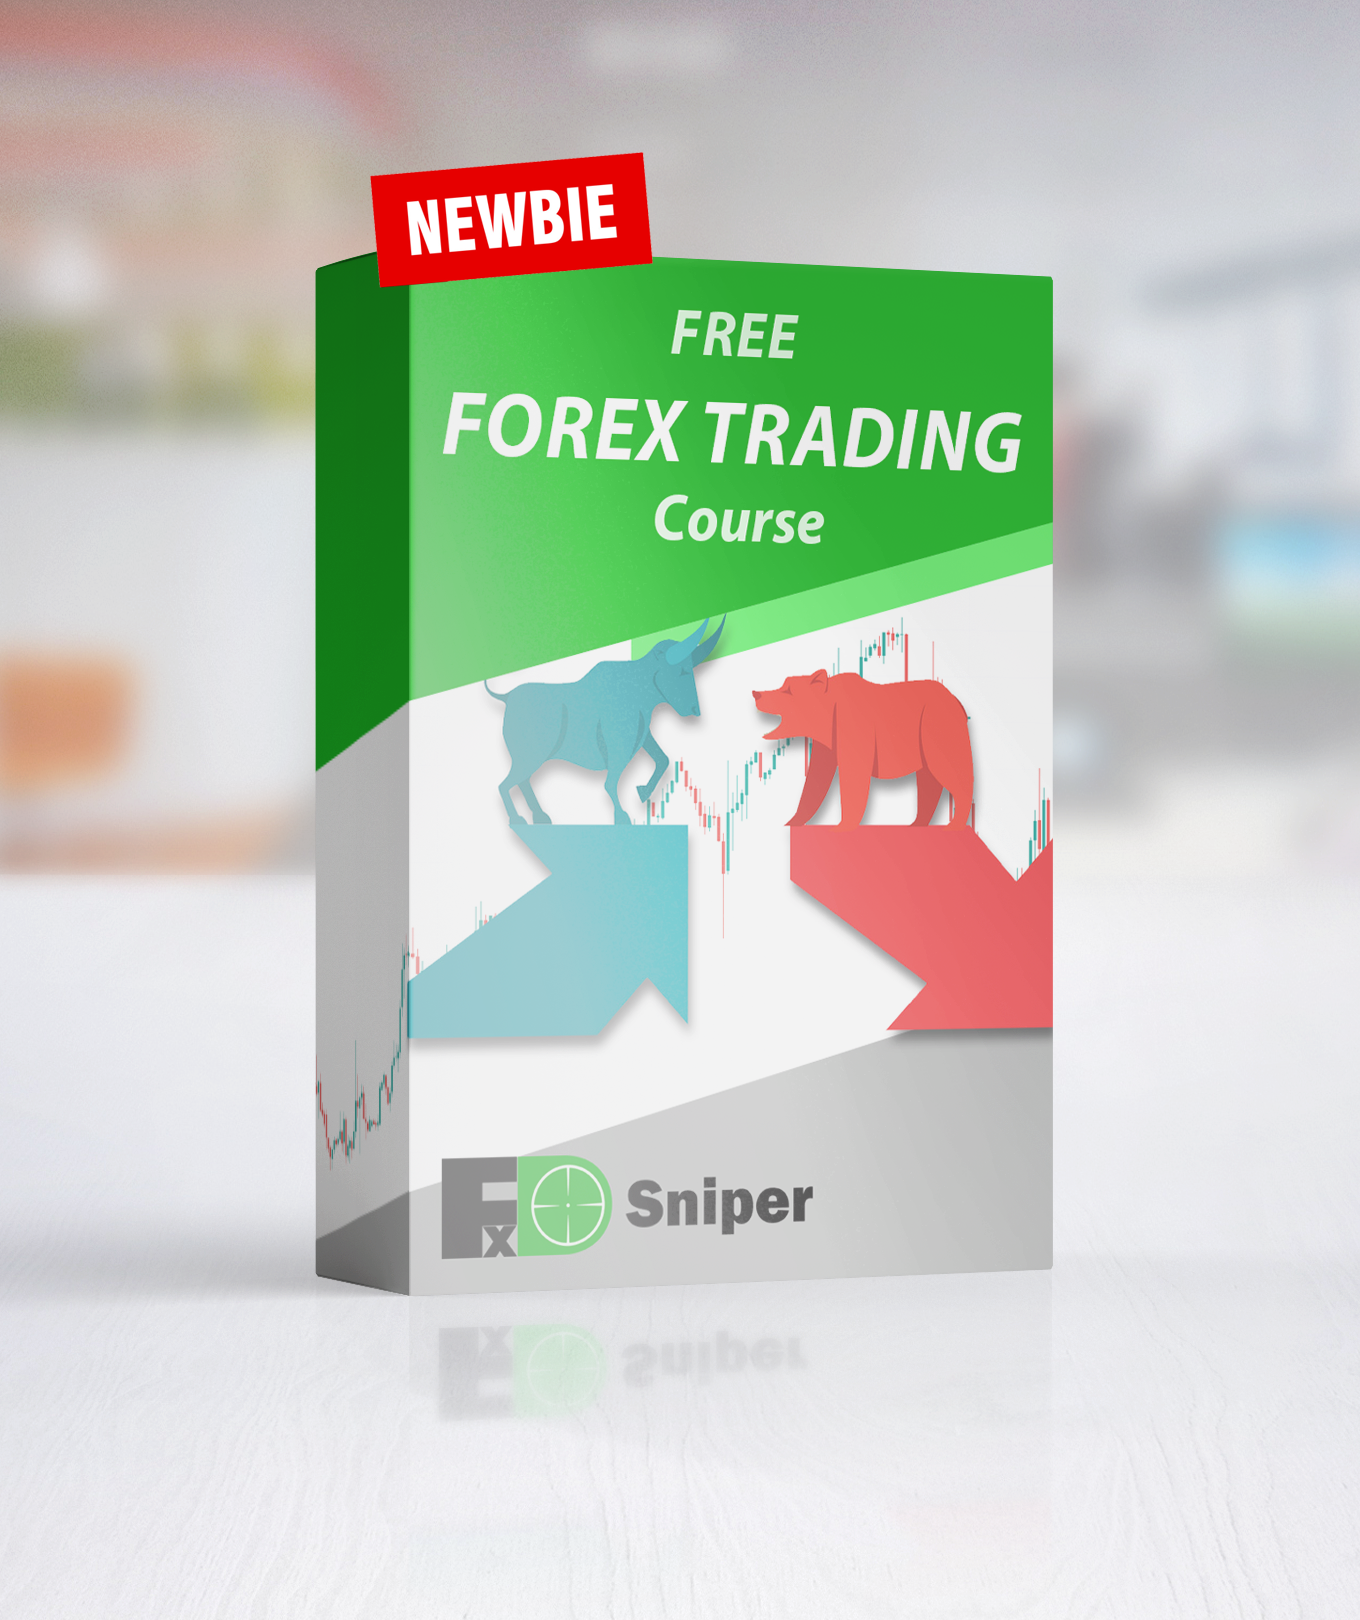 Newbie Free Forex Trading Course